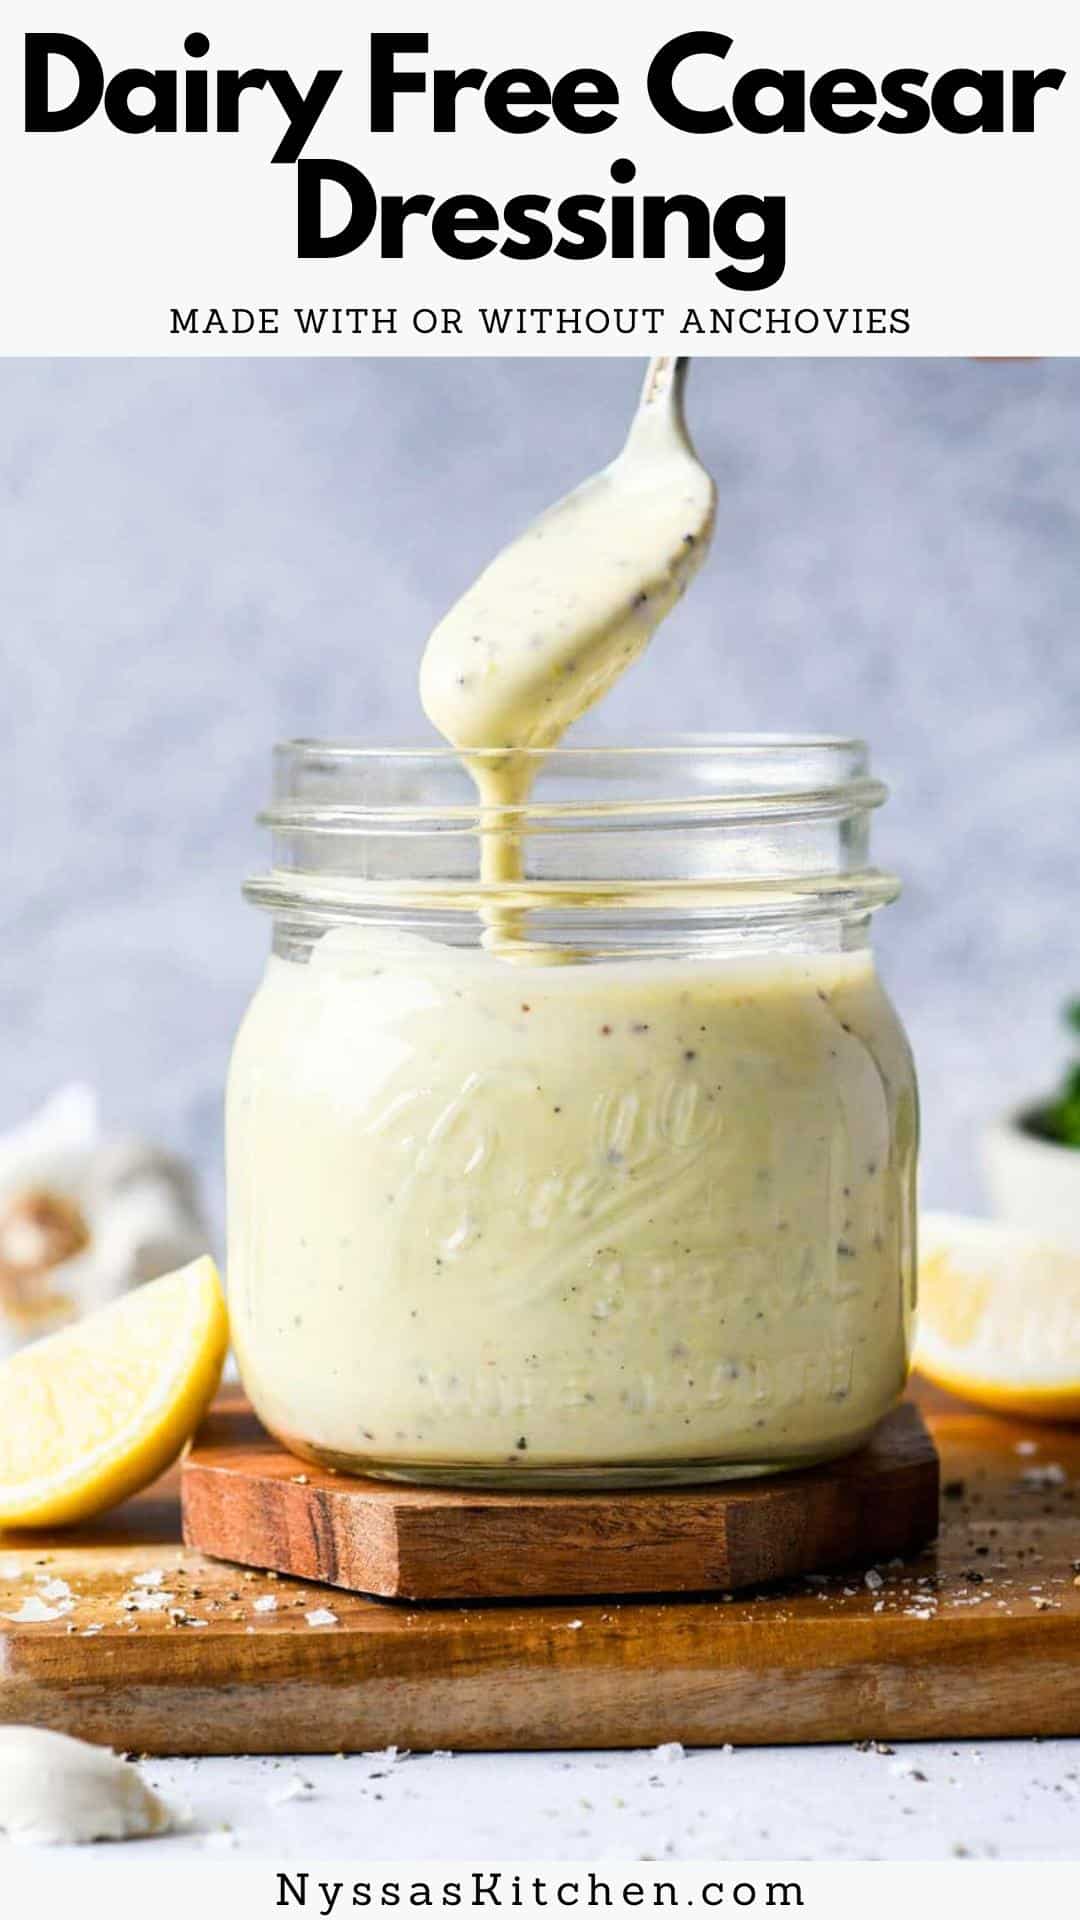 This creamy dairy free Caesar is one of my all time favorite salad dressings! It is rich, lemony, garlicky, insanely creamy, and full of punchy flavor. Perfect for a swoon worthy homemade Caesar salad. And it comes together in less than 5 minutes! Can be made with or without anchovies. Whole30, paleo, and low carb.